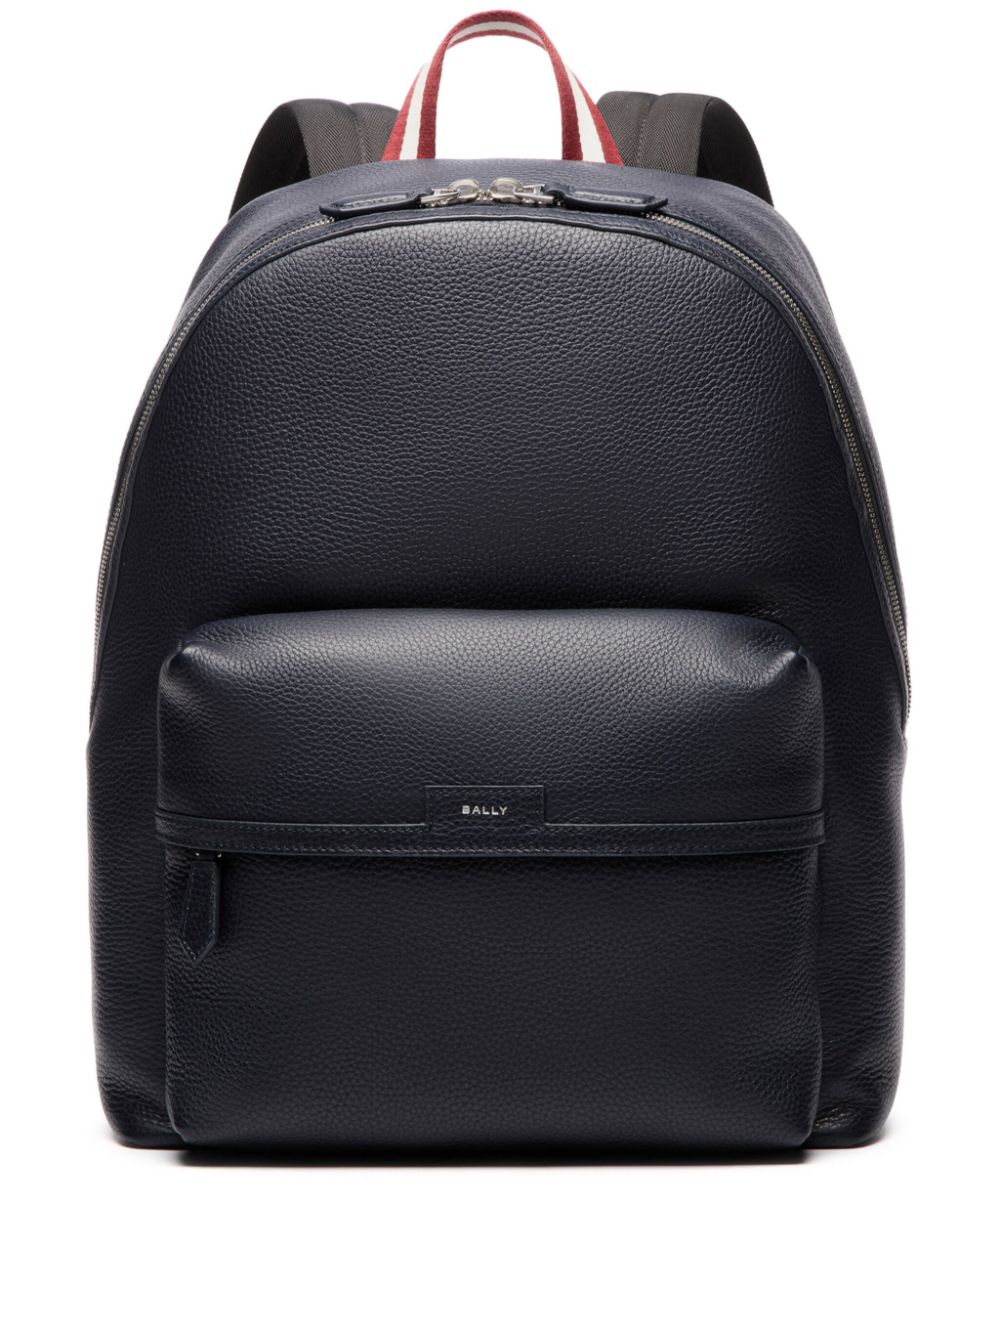 Bally Code Leather Backpack In Black